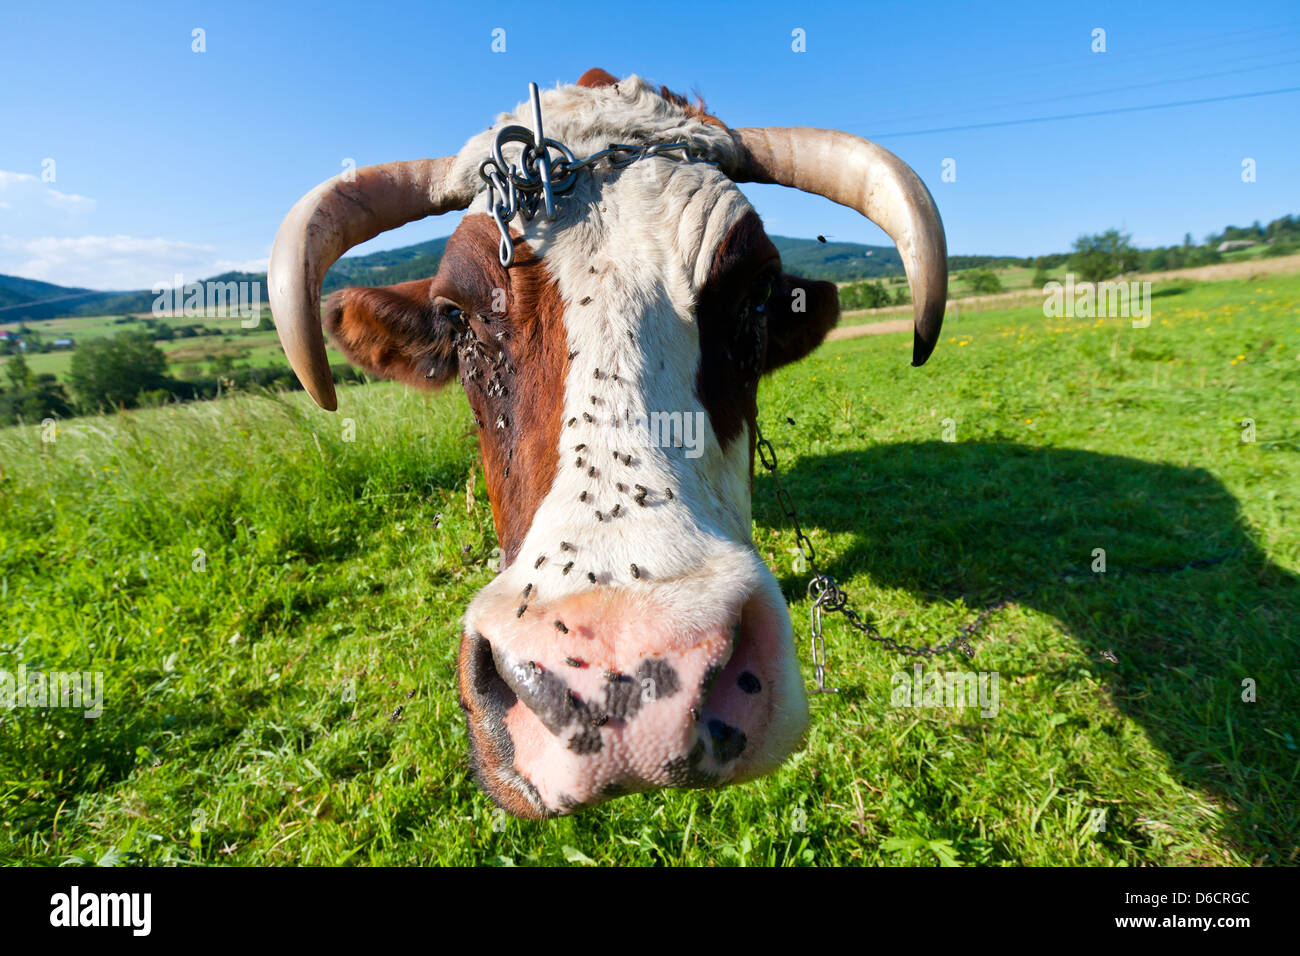 A brown and white dairy cow Stock Photo